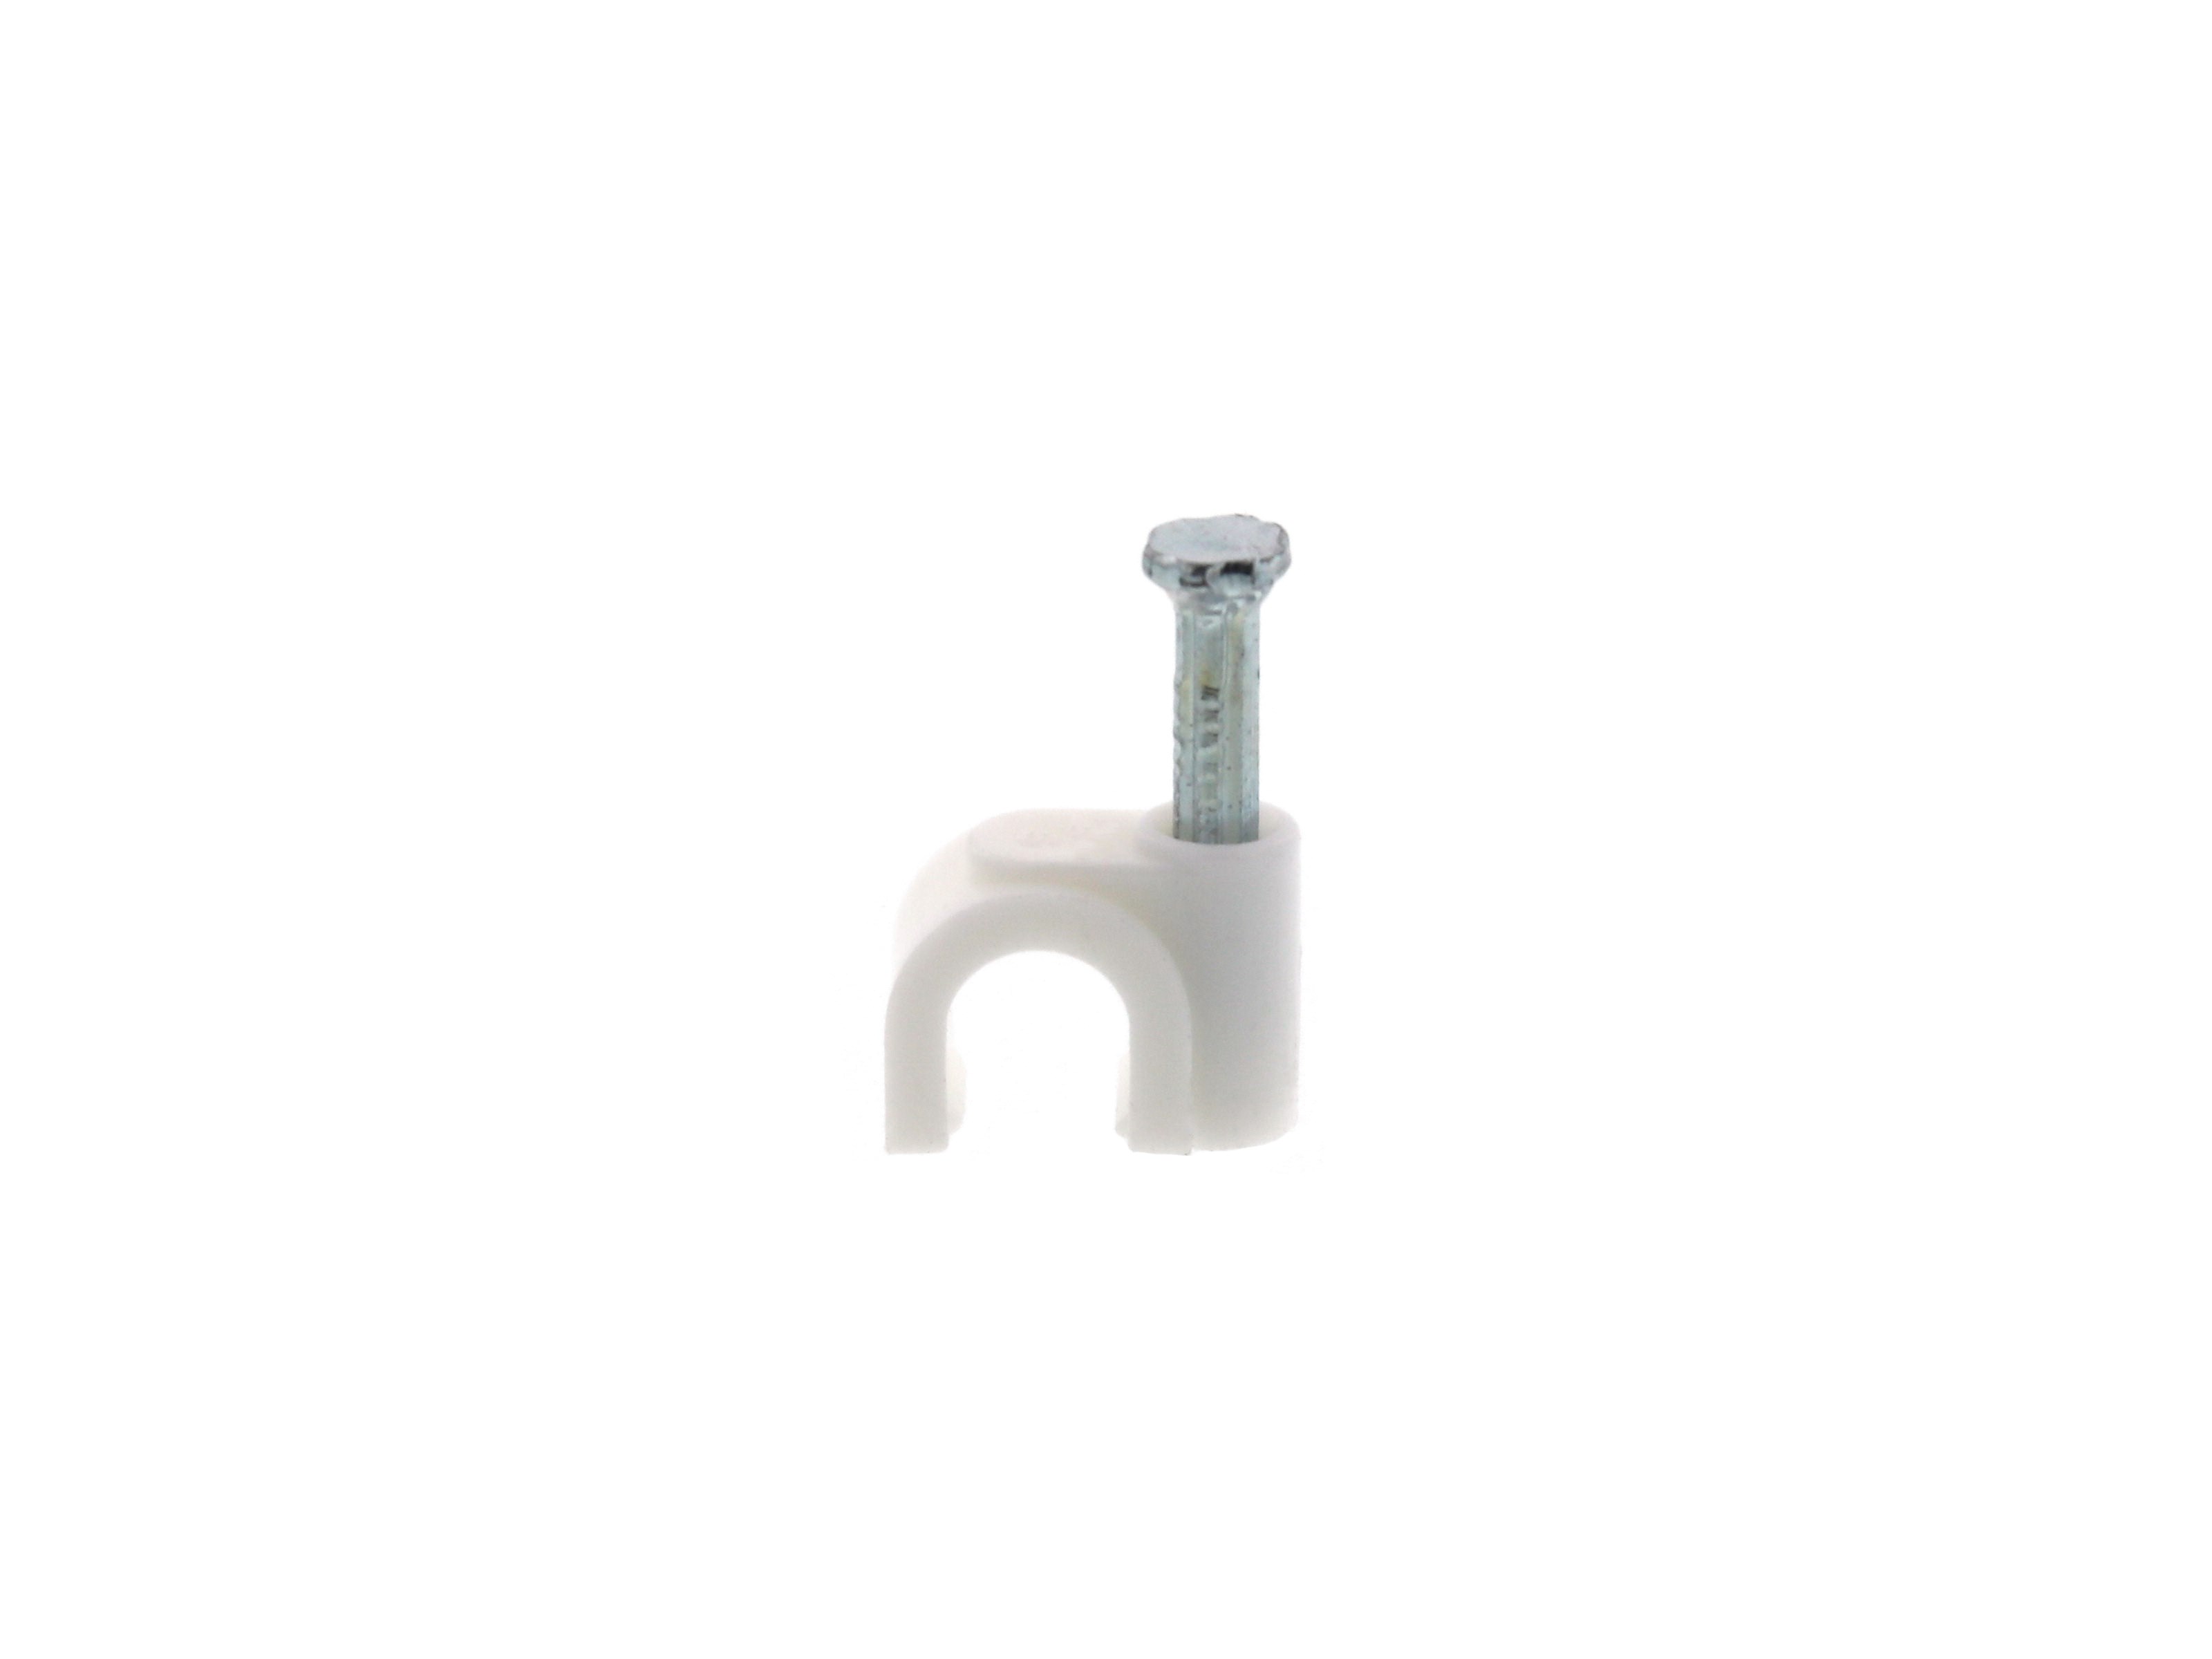 box of 100 RG6 Plastic Coaxial Cable Nail Clip 